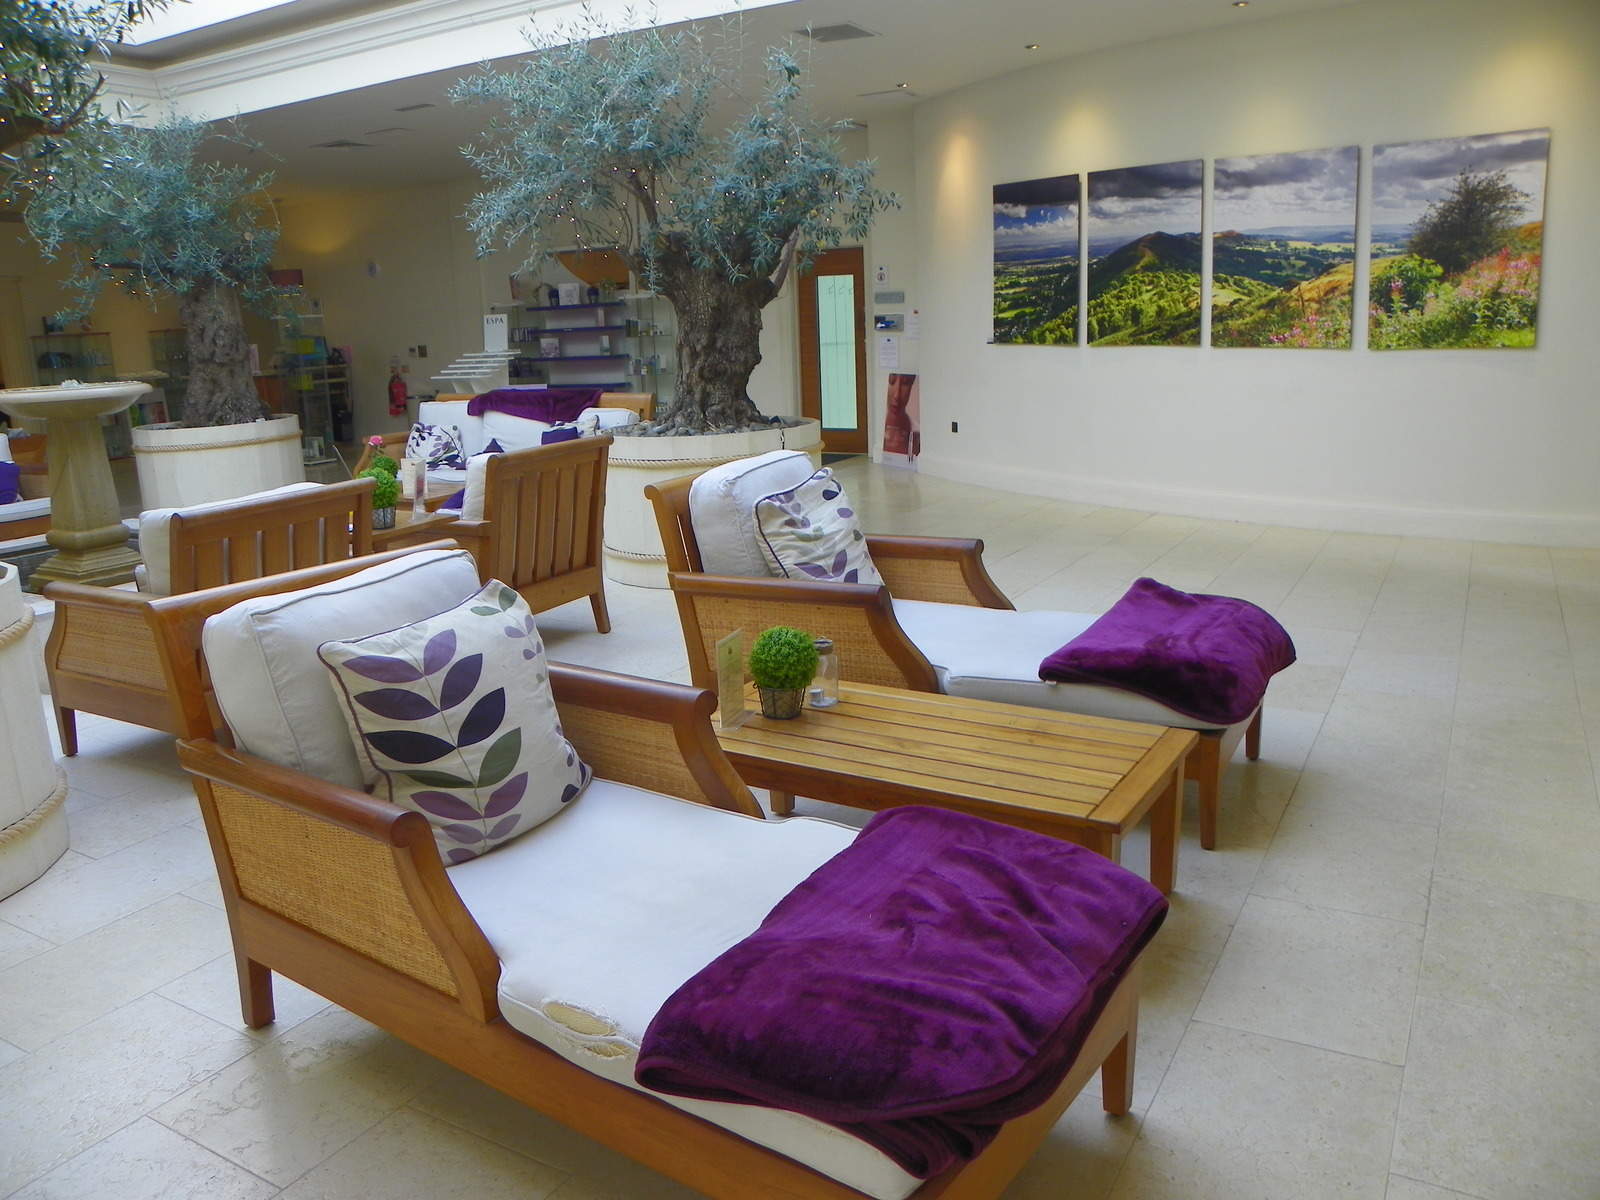 The Malvern Spa, Worcestershire: Full and comprehensive review. 